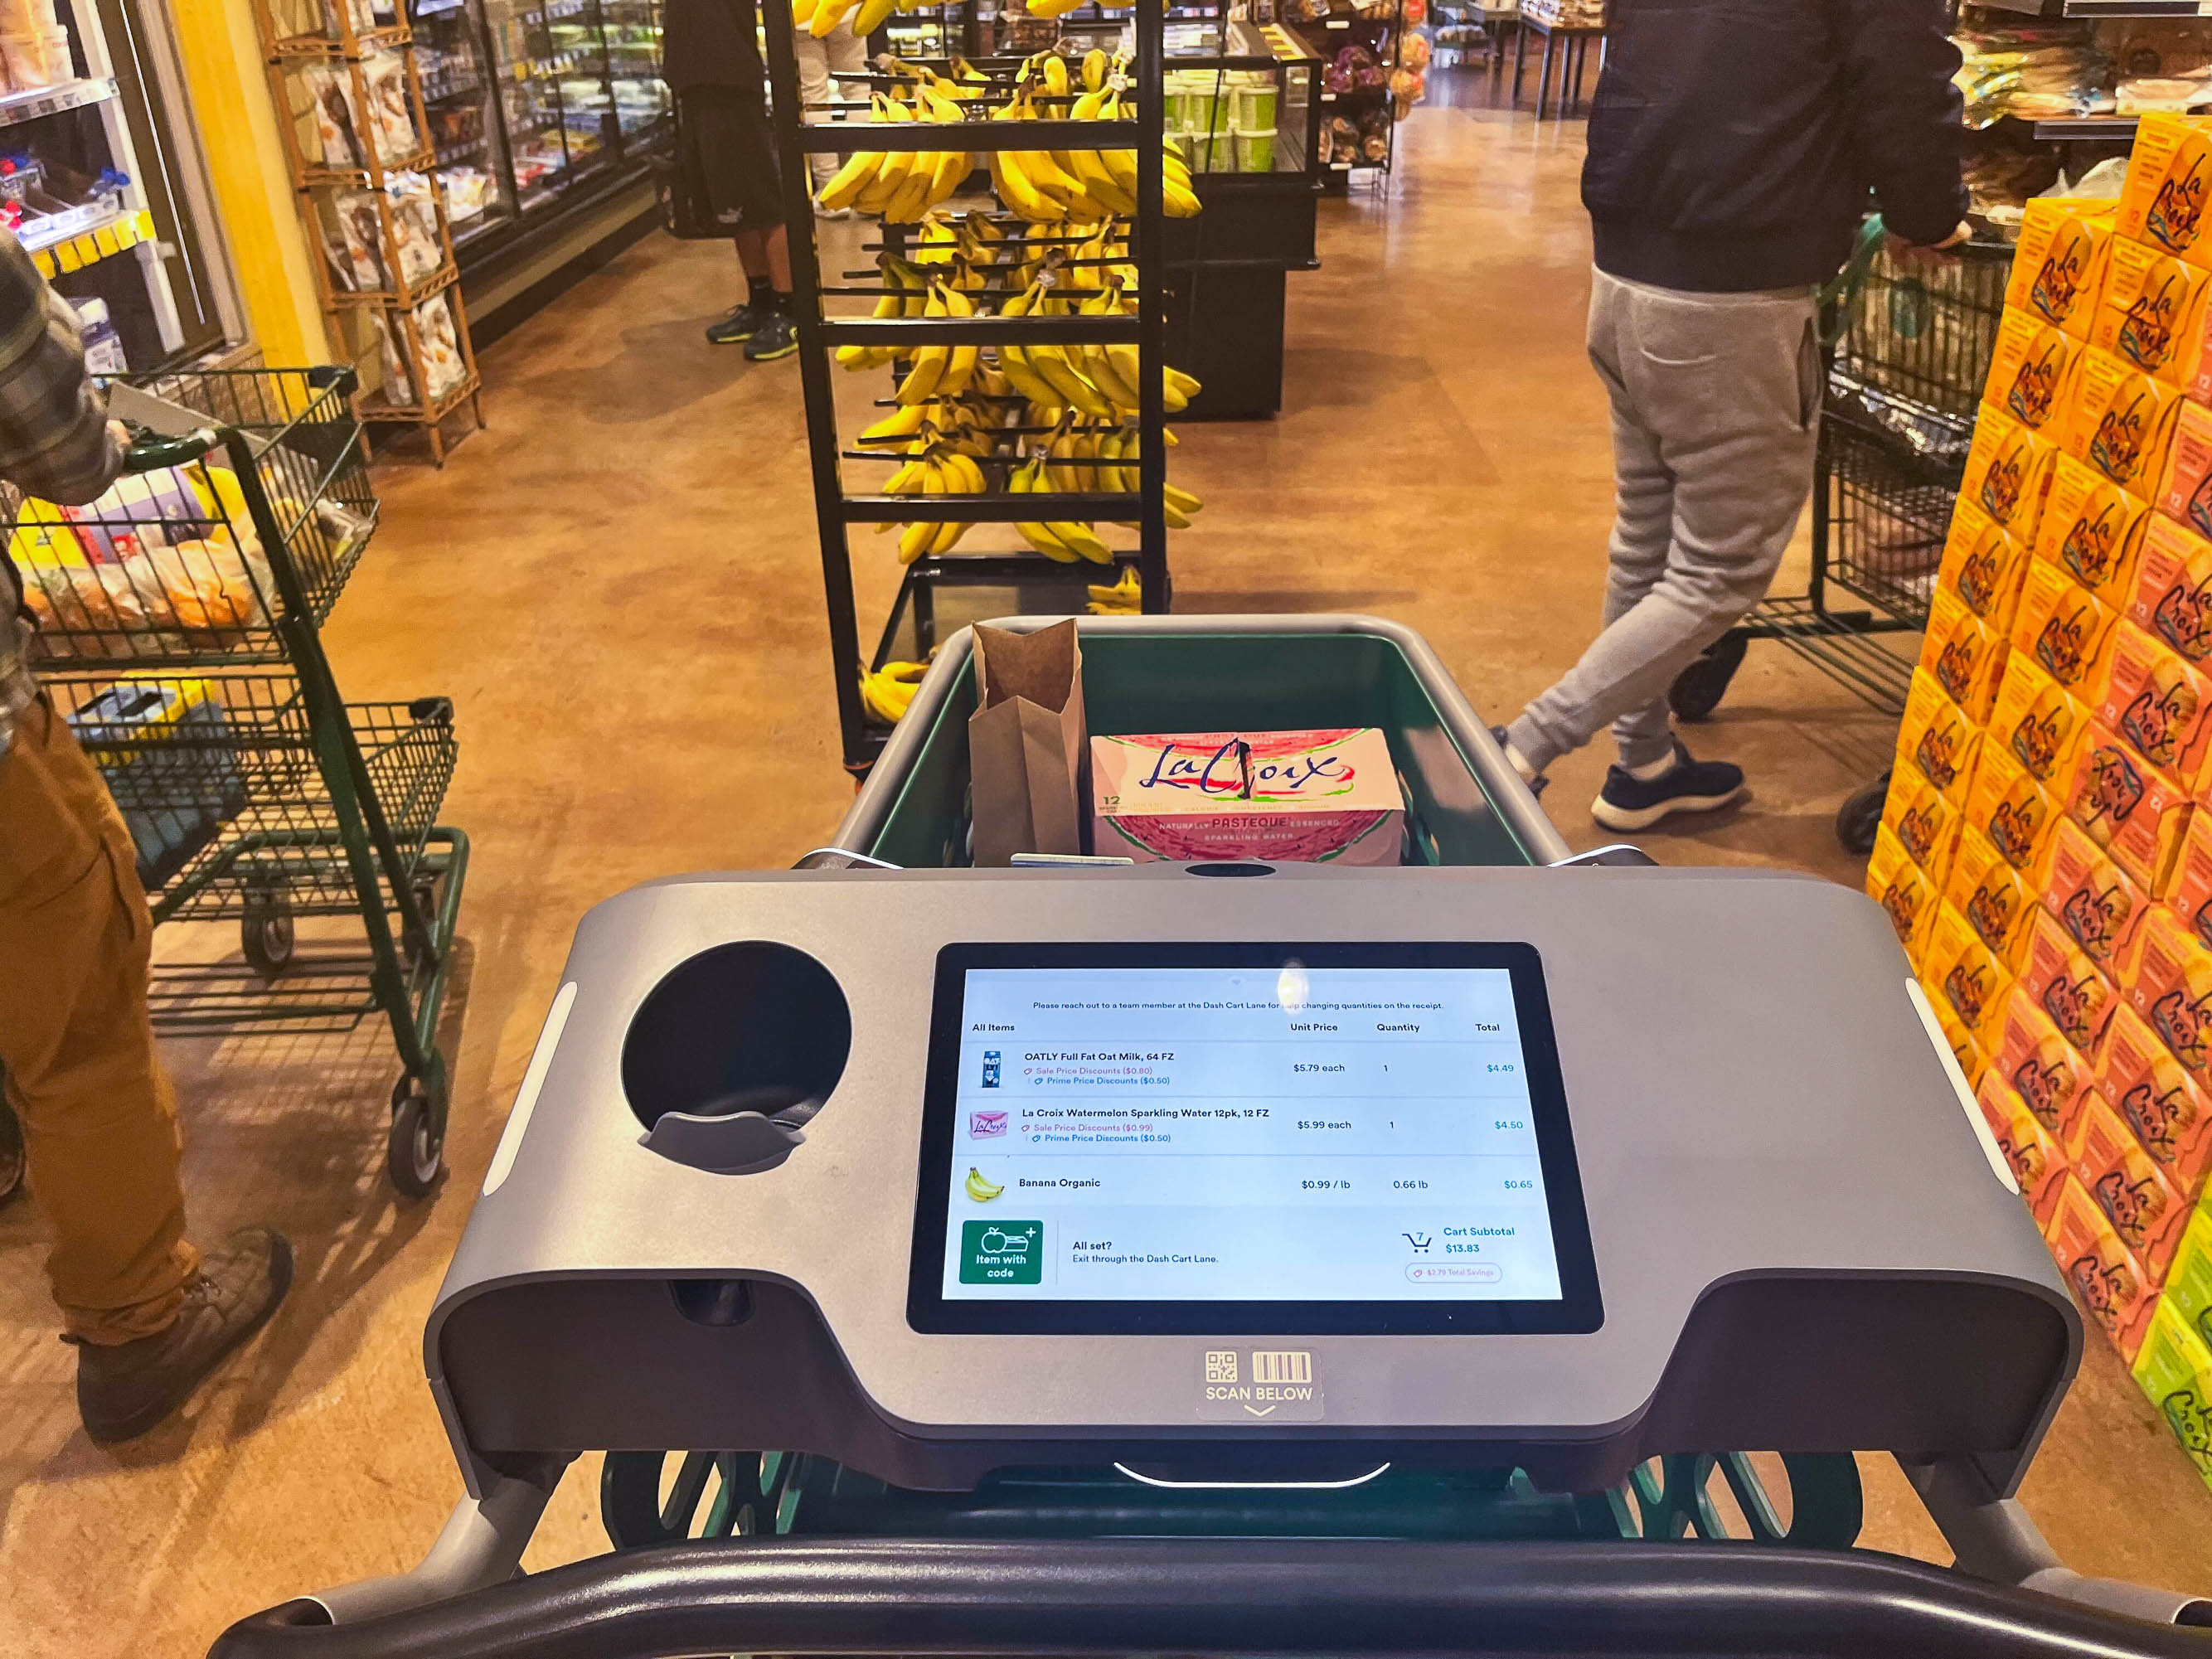 A shopping cart with a digital screen displaying items, in a grocery store aisle with shoppers and produce nearby.